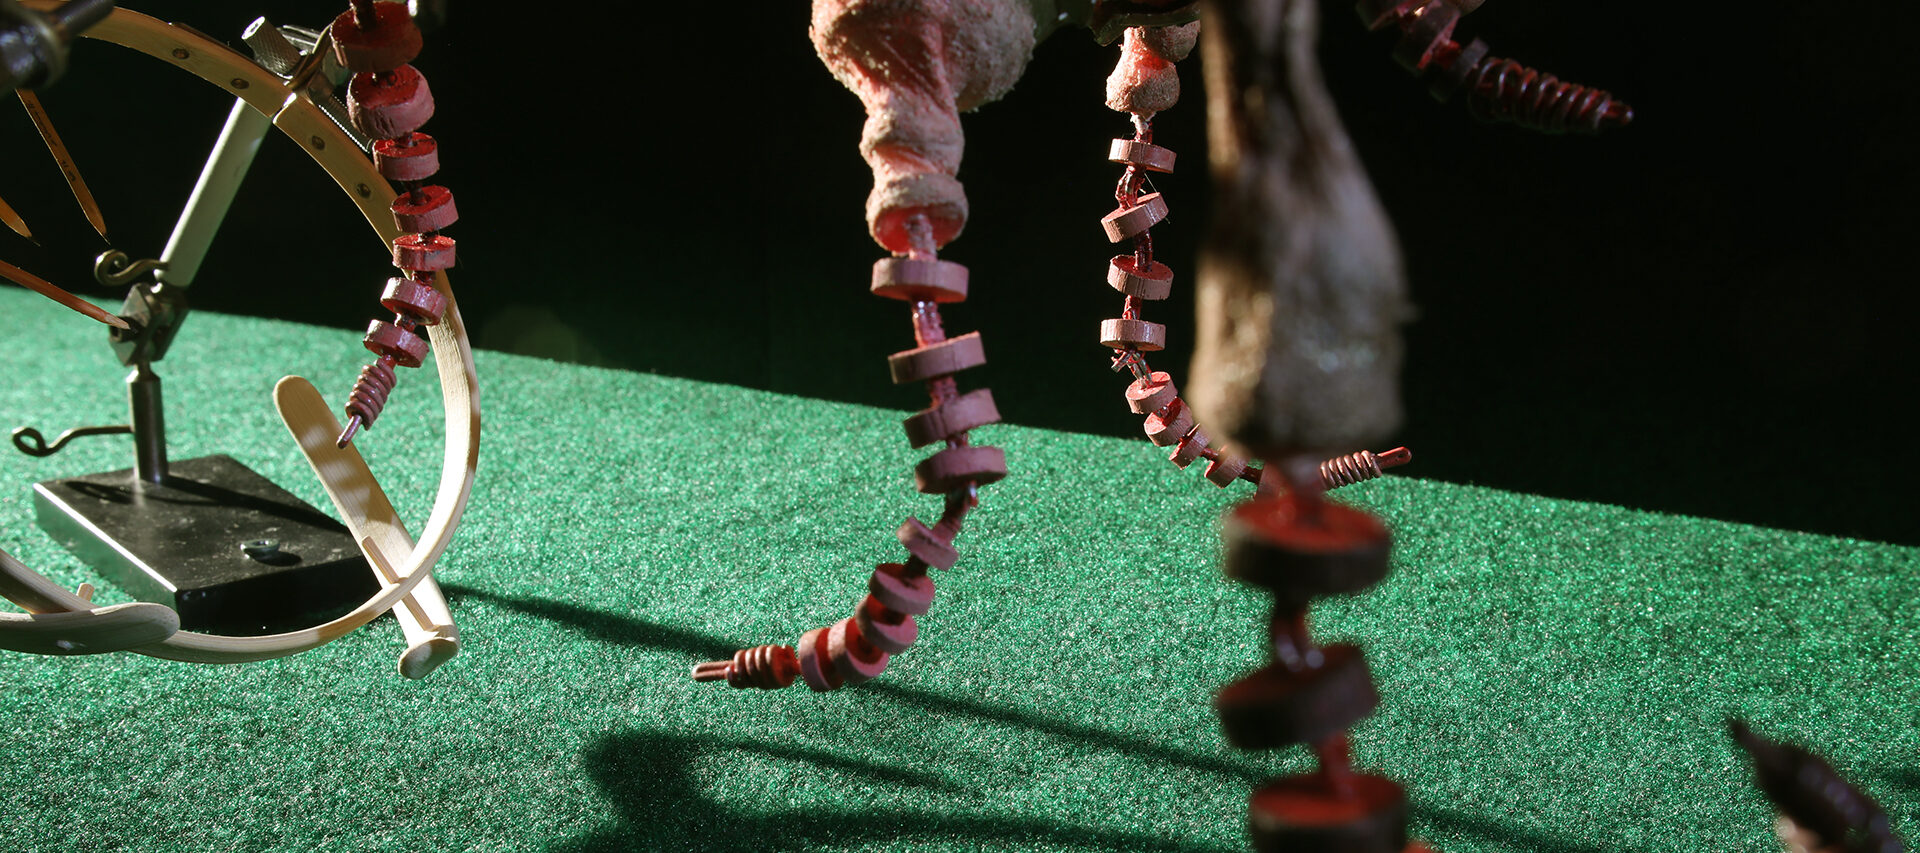 In this screen still from a puppet stop motion animation, minature sculptures made from wood, metal, and other materials are arranged on top of, and hang above, green turf, set against a pitch black background. The sculpture's shadows appear on the turf. The sculptures are made up of various circular designs.